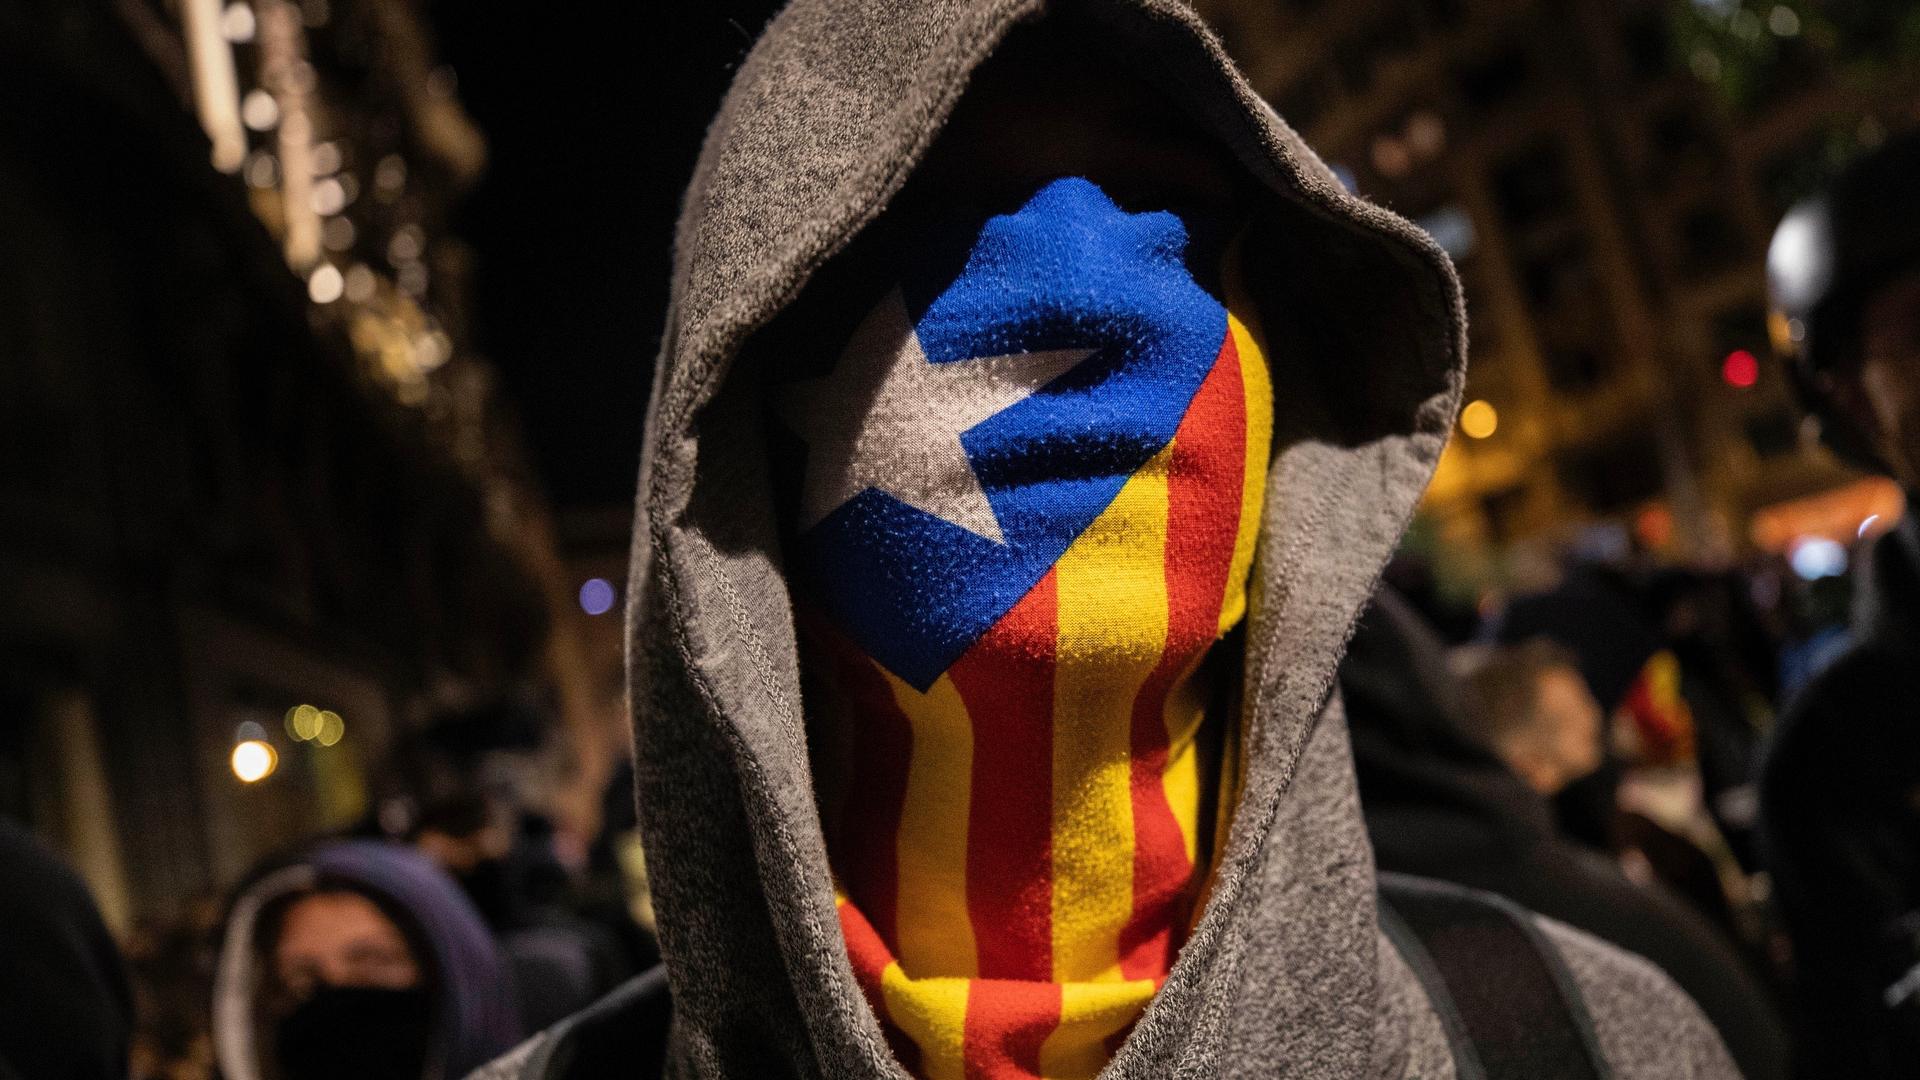 A Catalan pro-independence protestor wearing an Estelada, or Catalan independence mask, stands in front of police, not seen, during a protest in Barcelona, Saturday, Oct. 26, 2019.